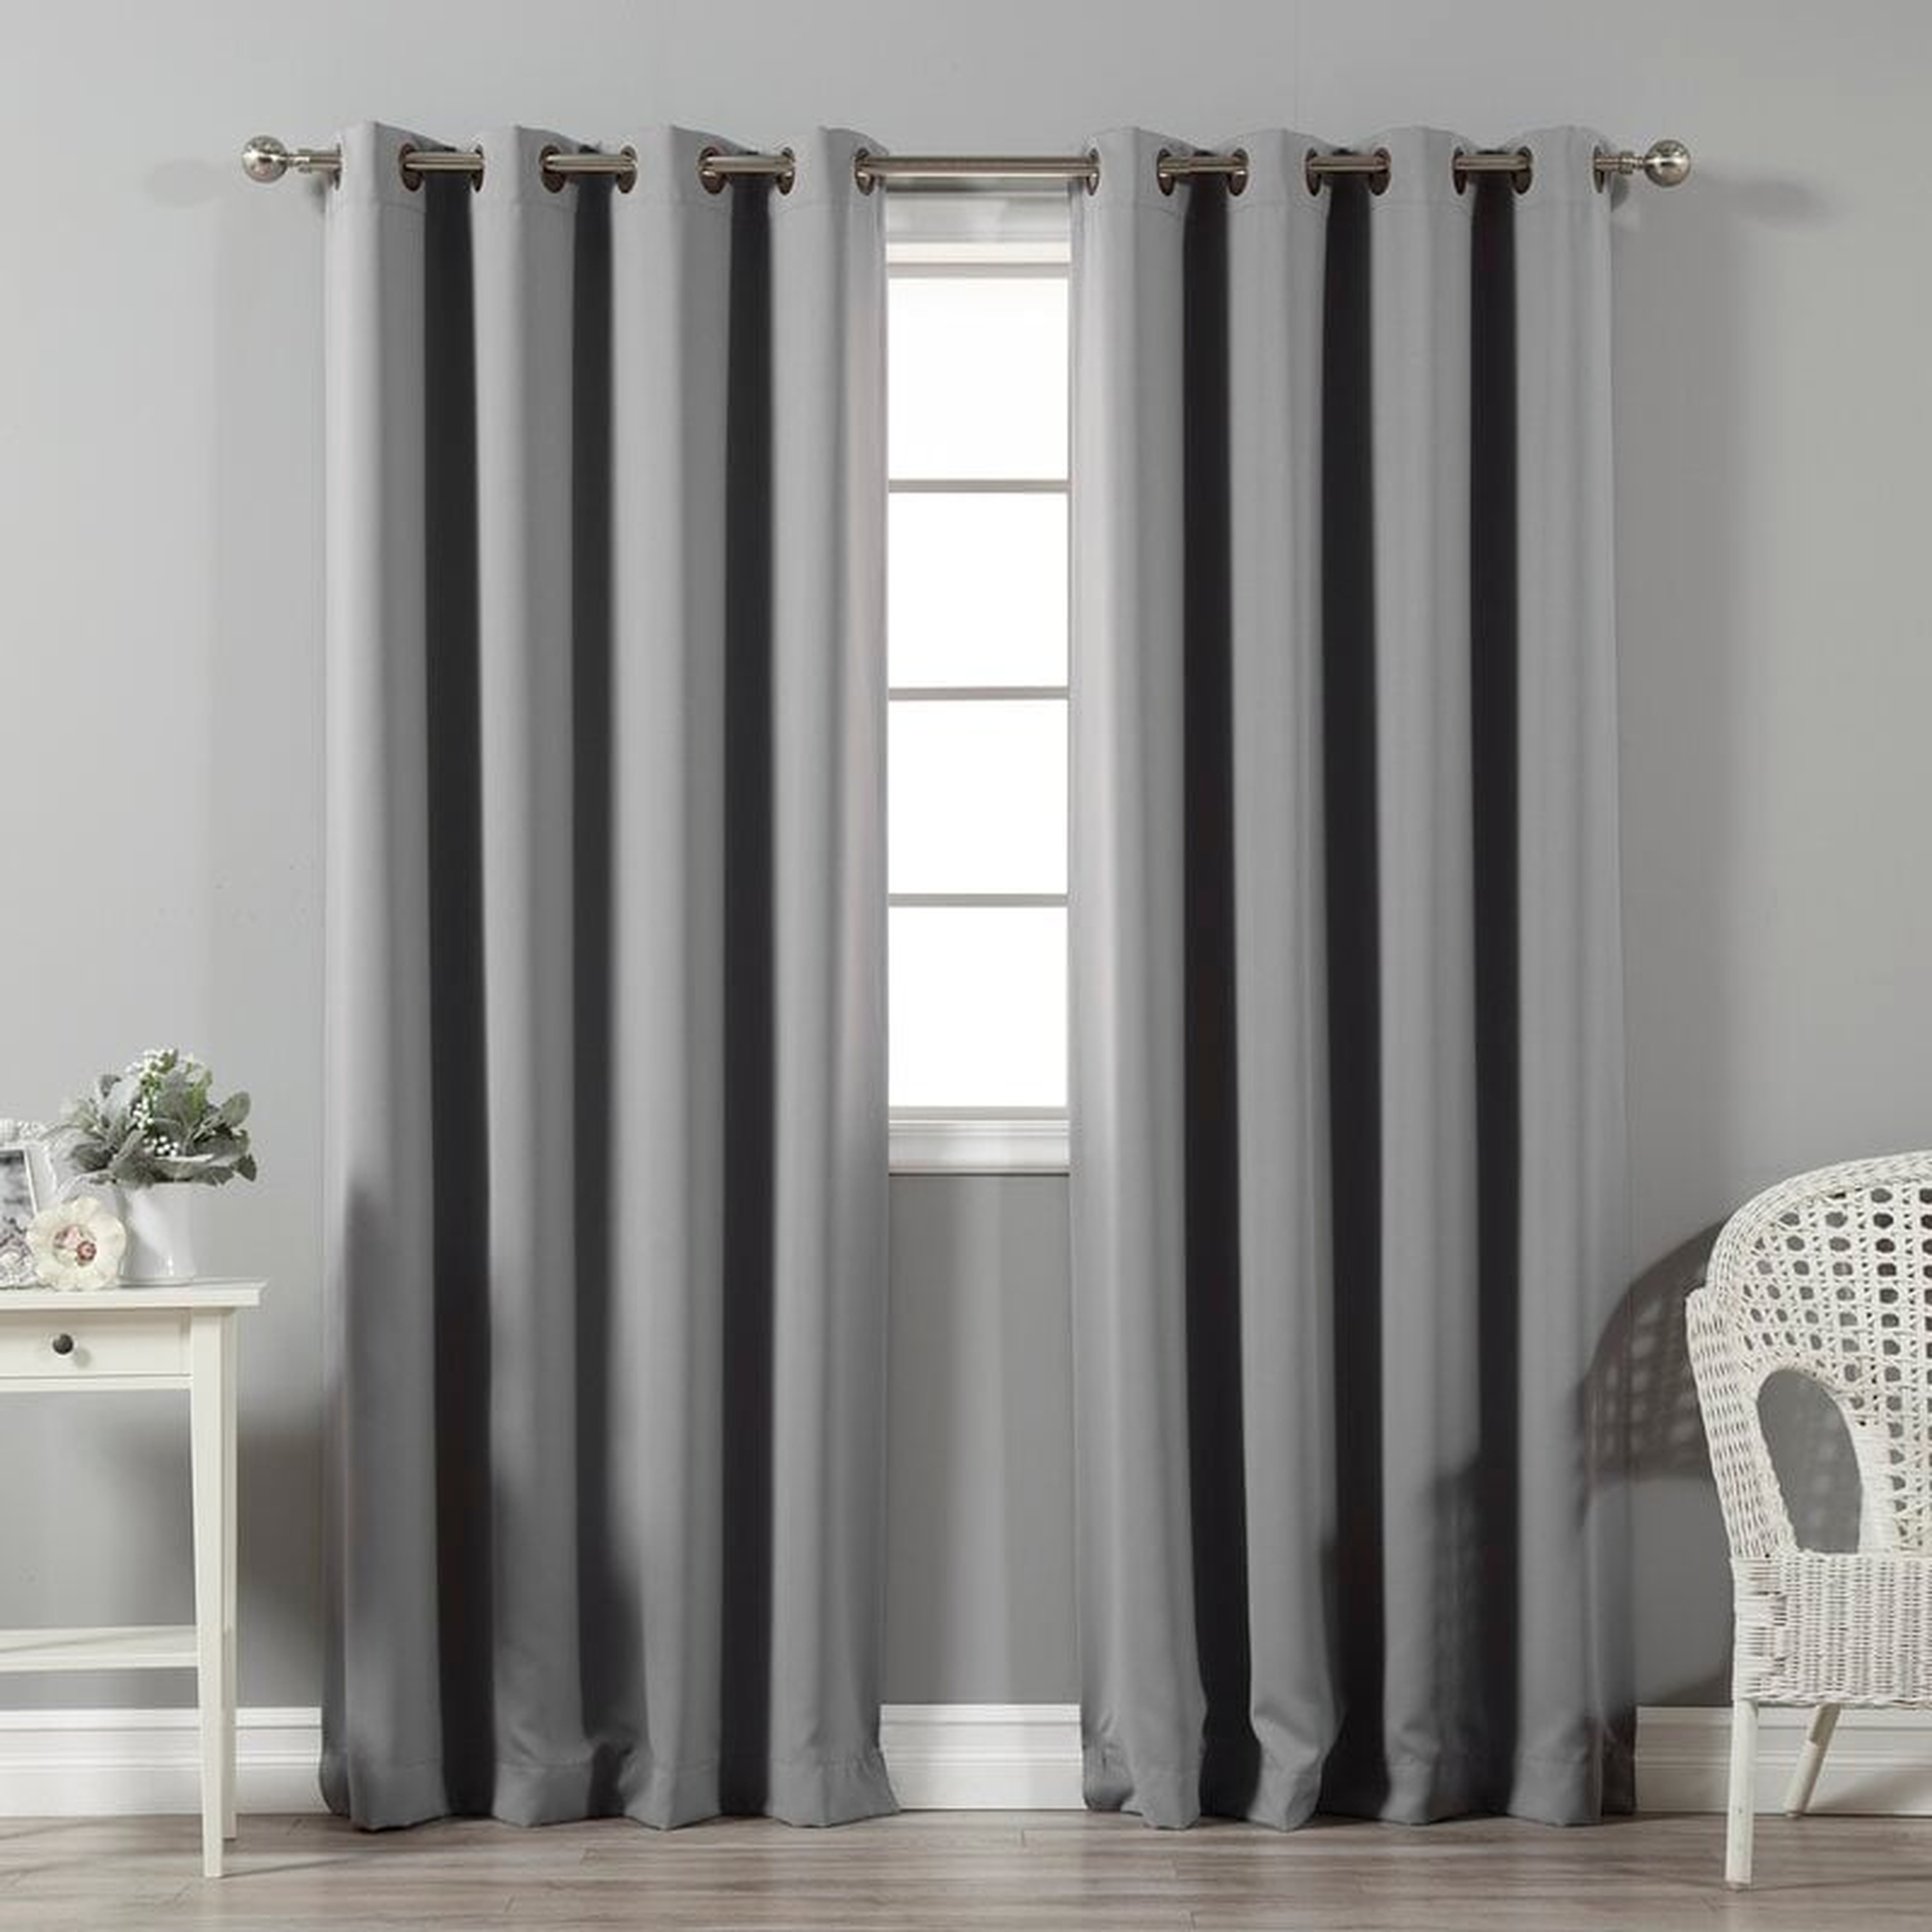 Solid Blackout Thermal Grommet 2 Curtains / Drapes (Set of 2). Gray - Wayfair